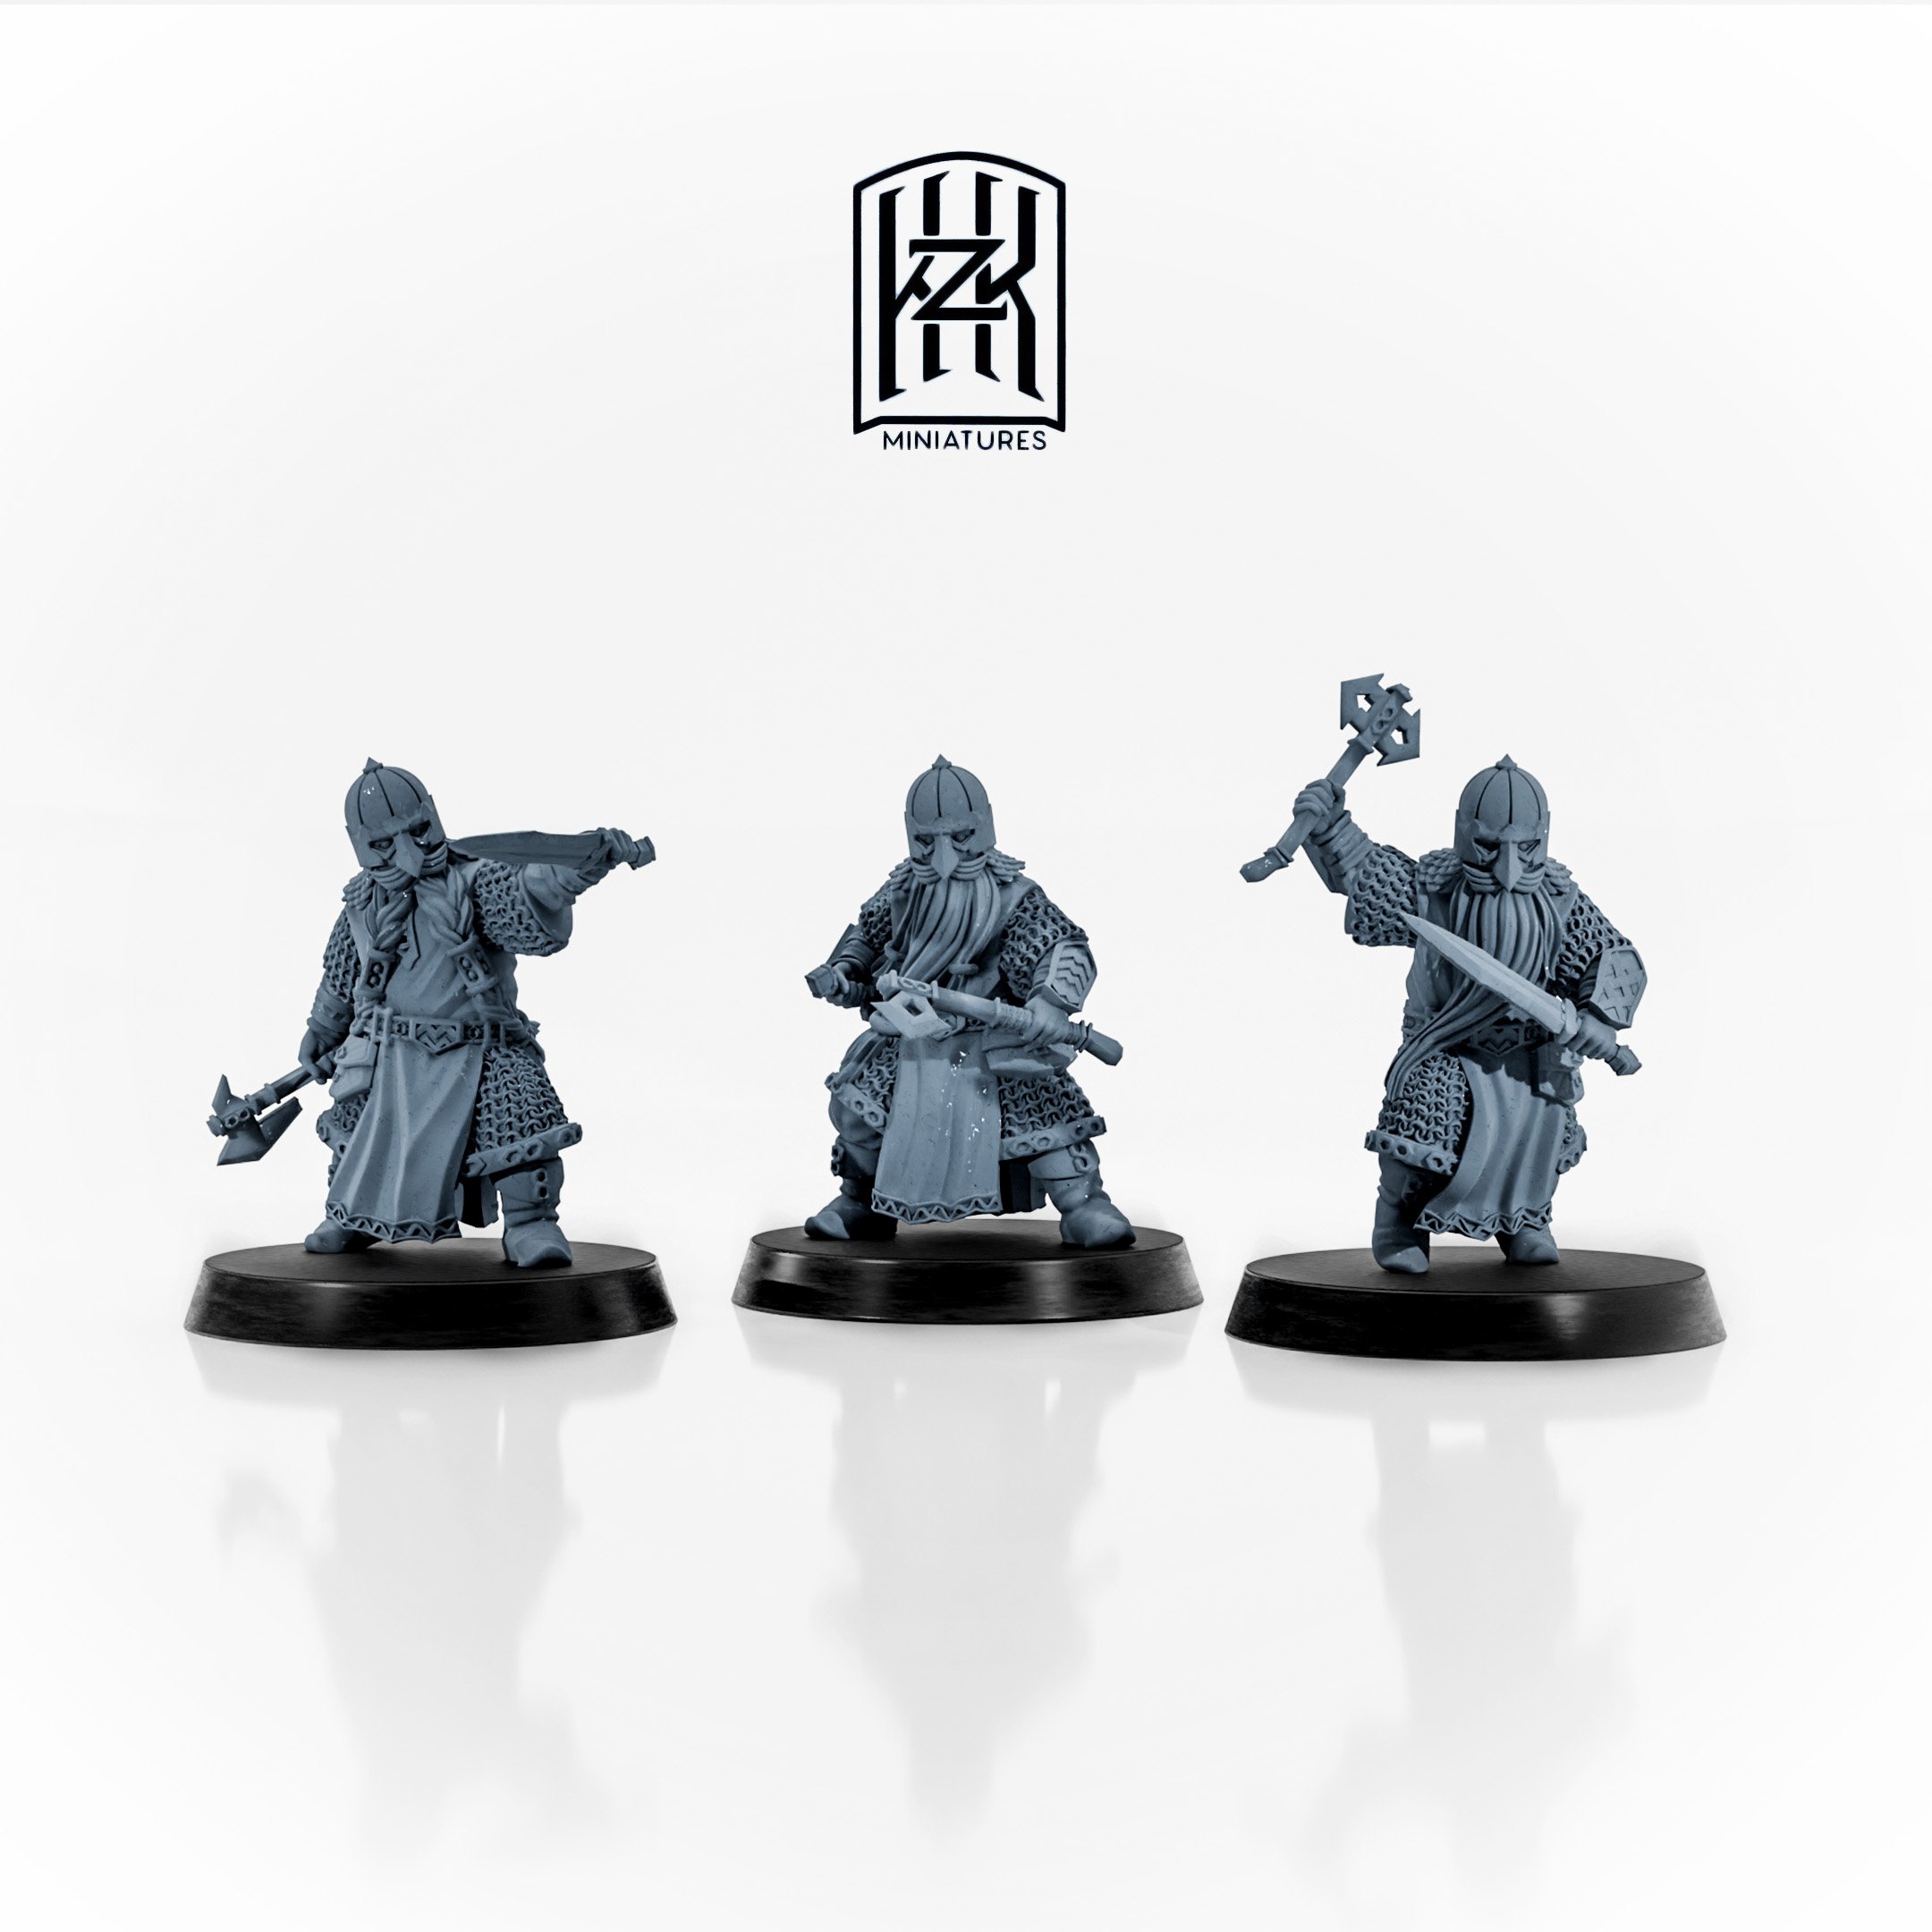 Dwarven Road Guard fantasy wargaming miniatures 28mm scale designed by Kzk Minis 3D printed by Forgemaster Miniatures